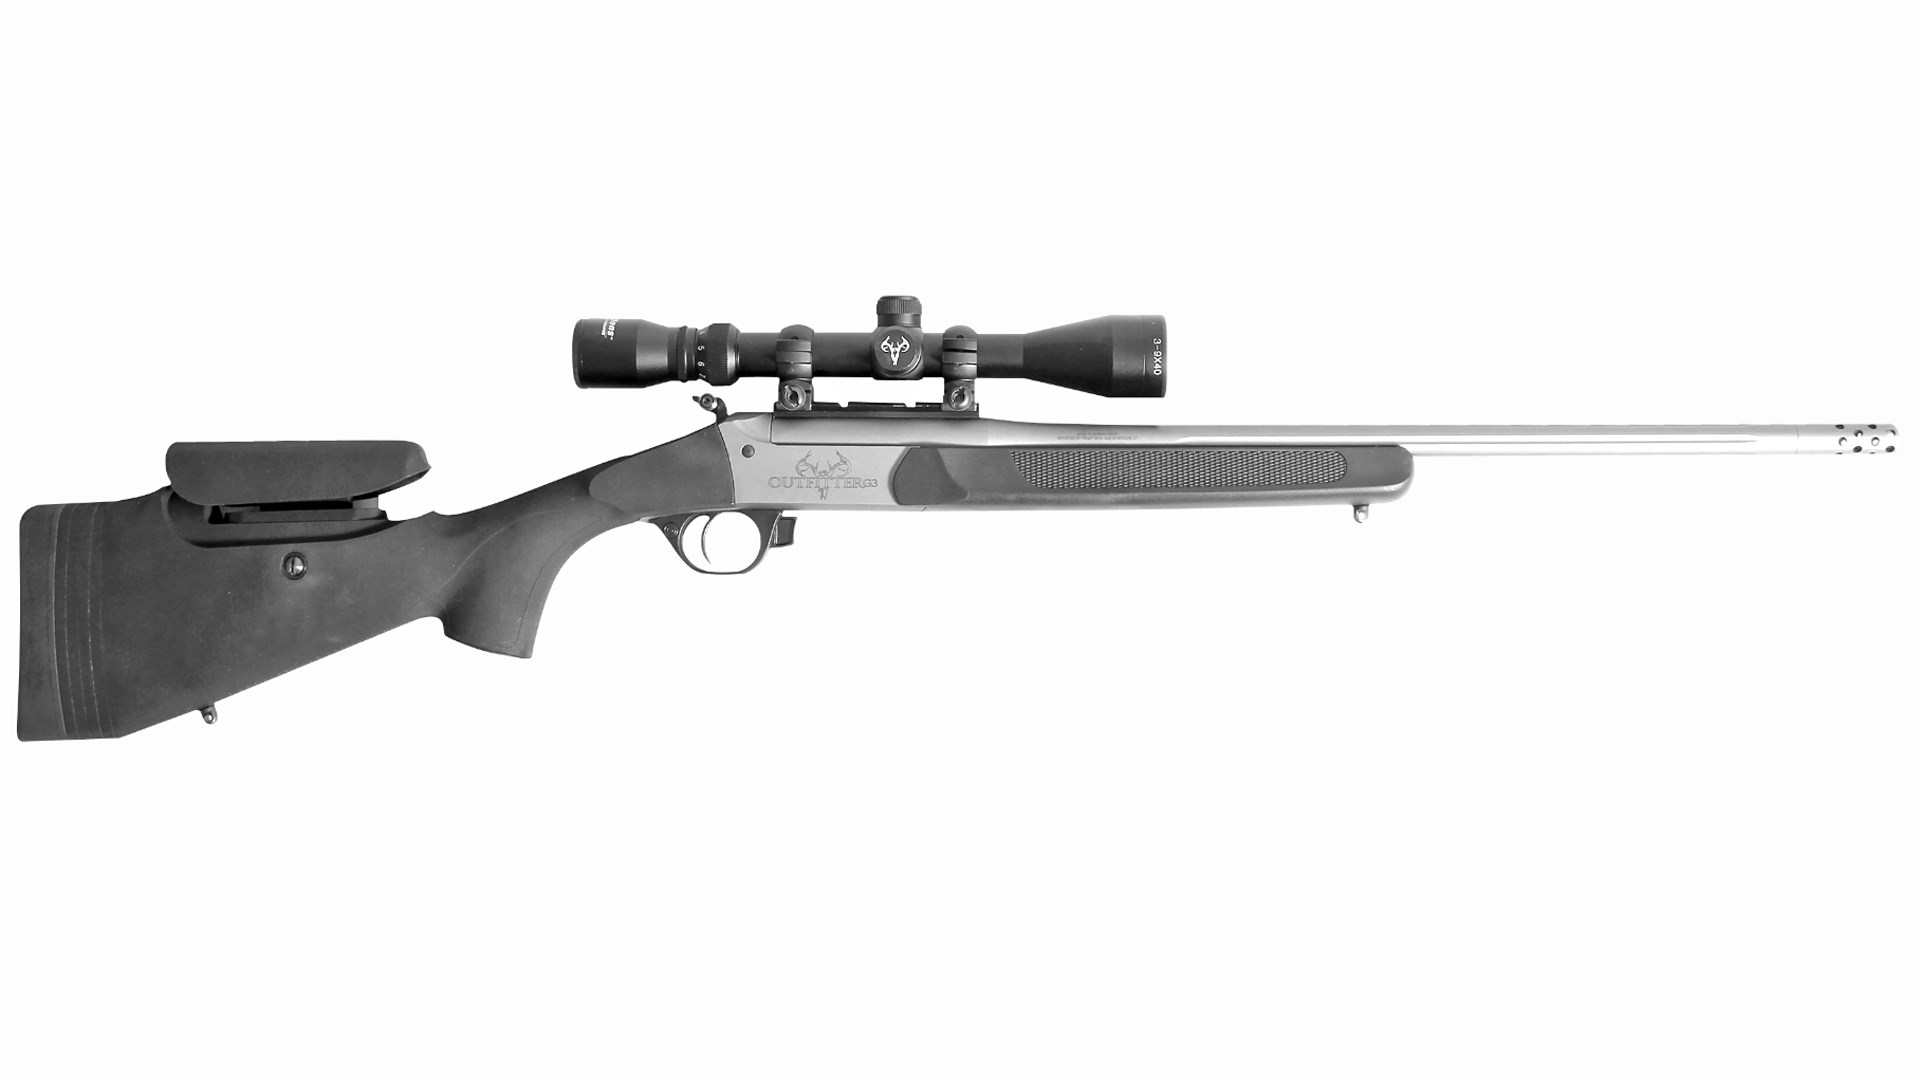 Right side of the Traditions Pro Series muzzleloader with a mounted scope.